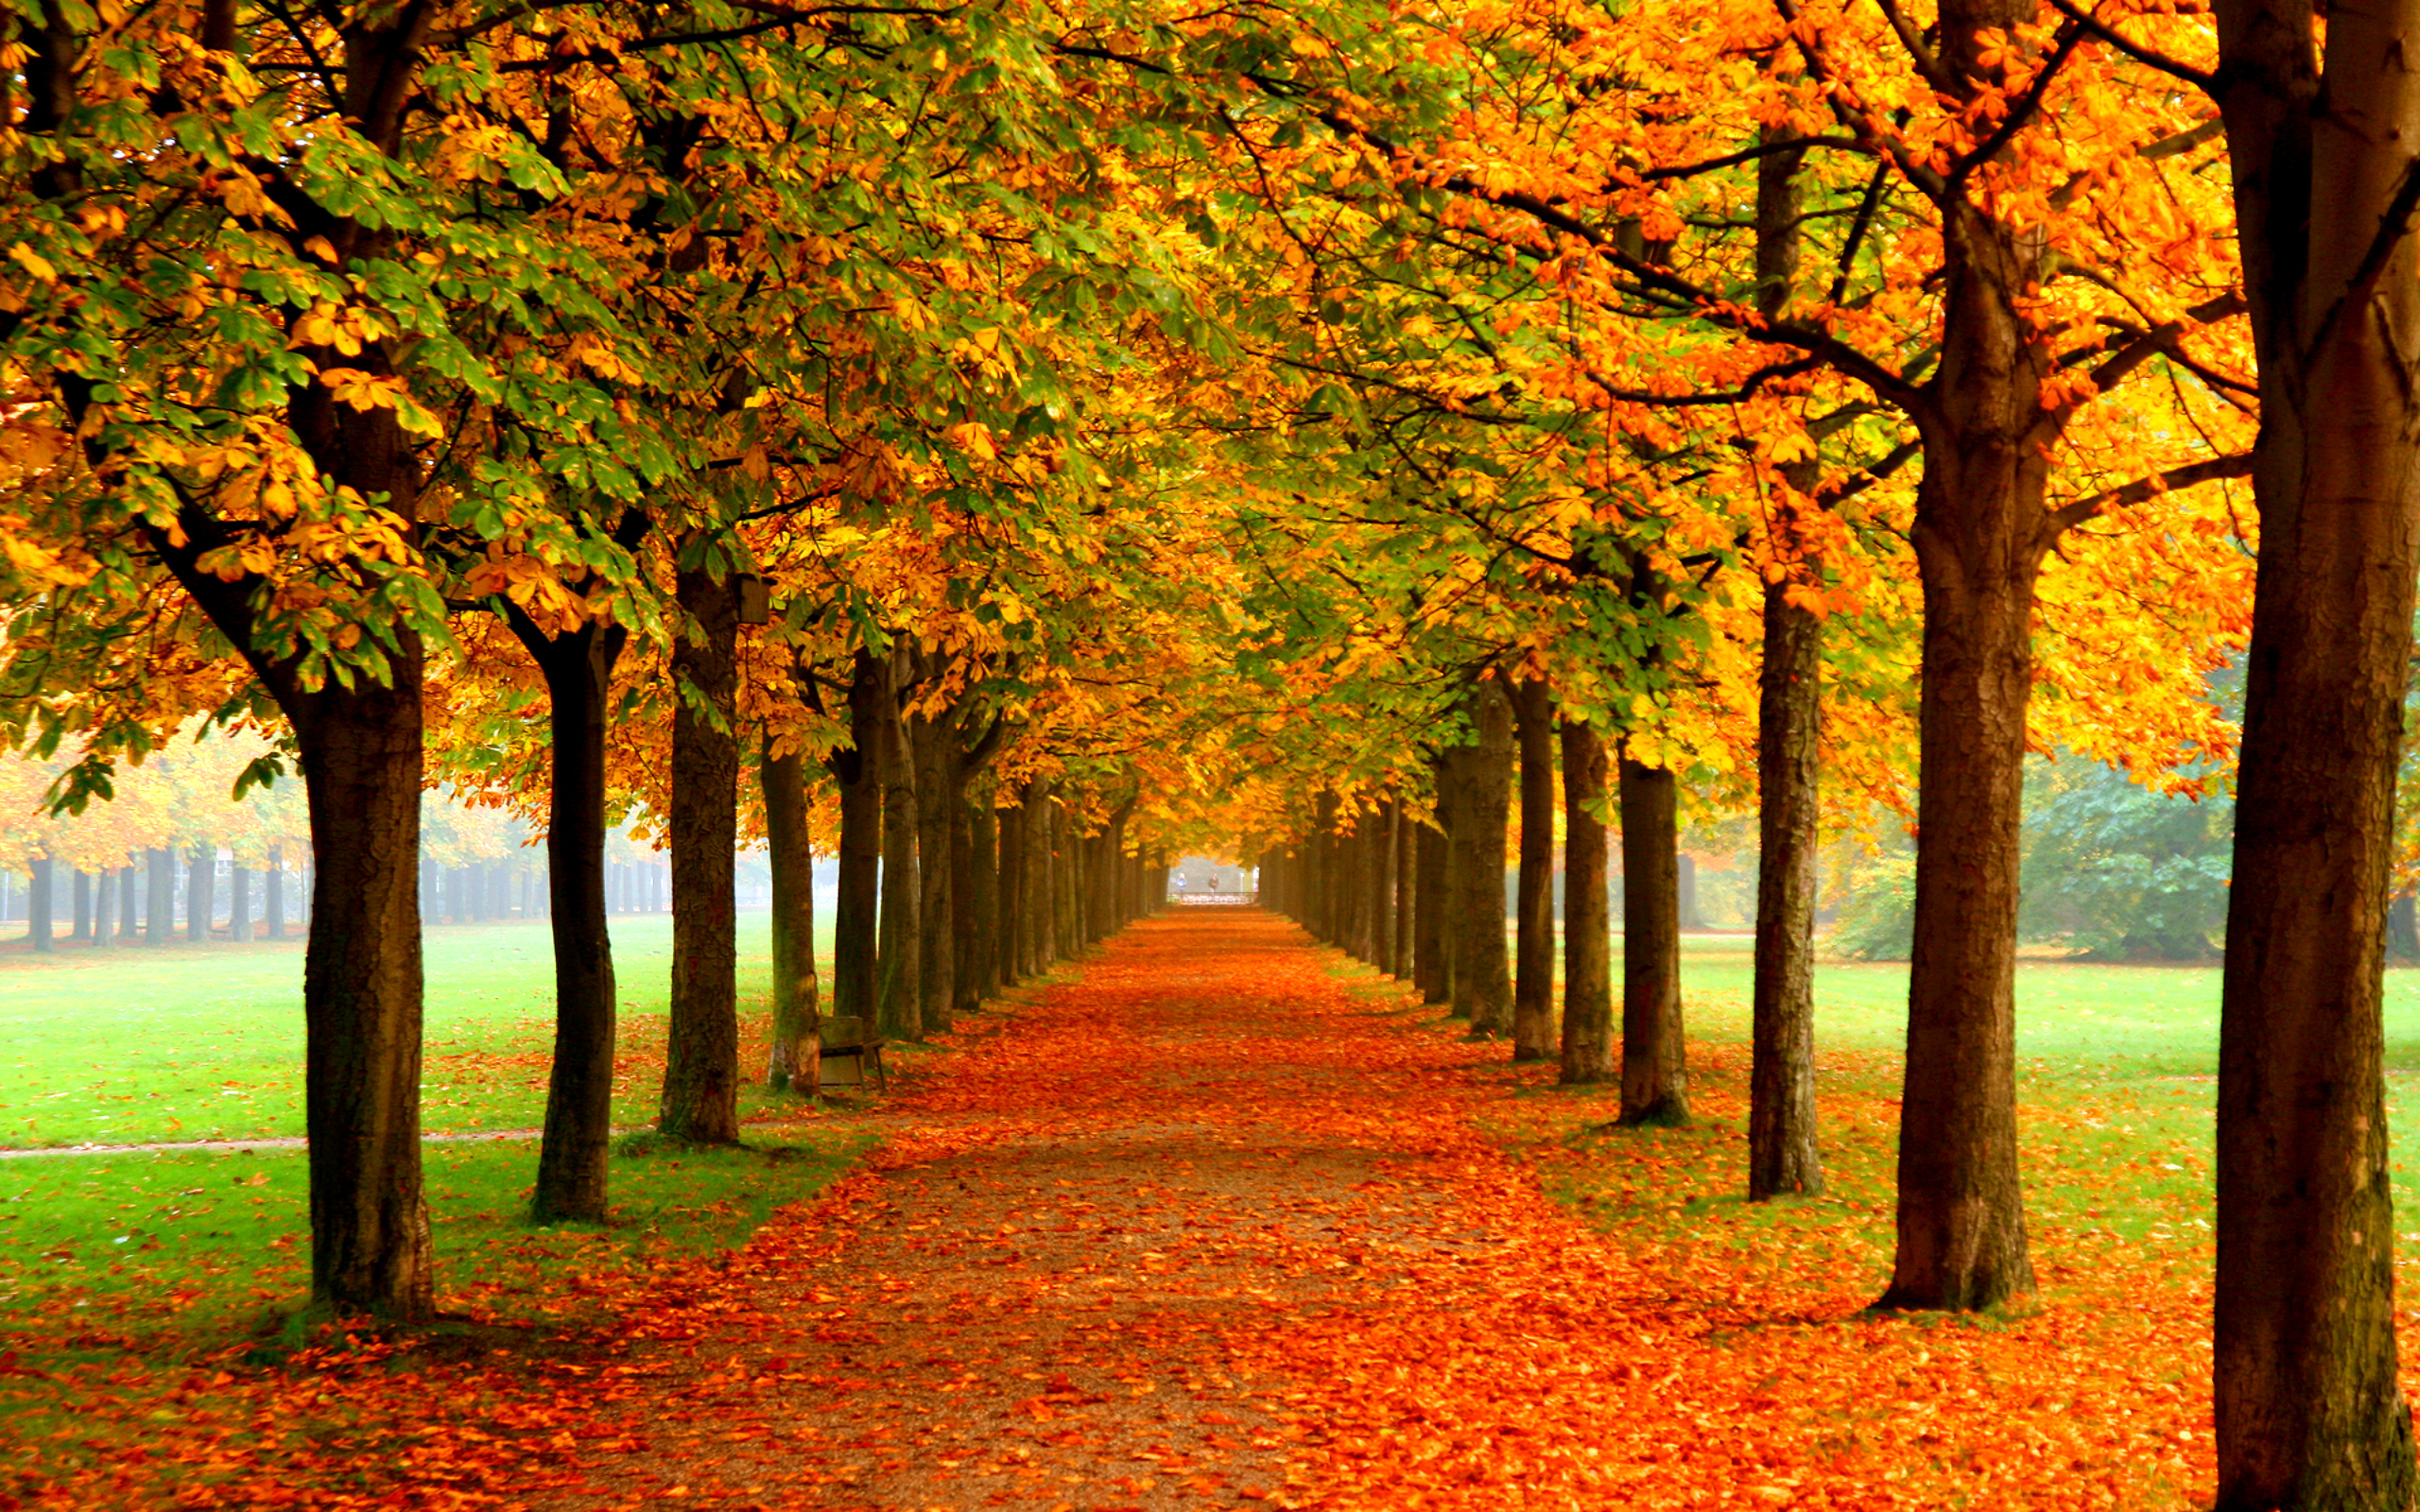 Autumn Colors Wallpaper Images amp Pictures   Becuo